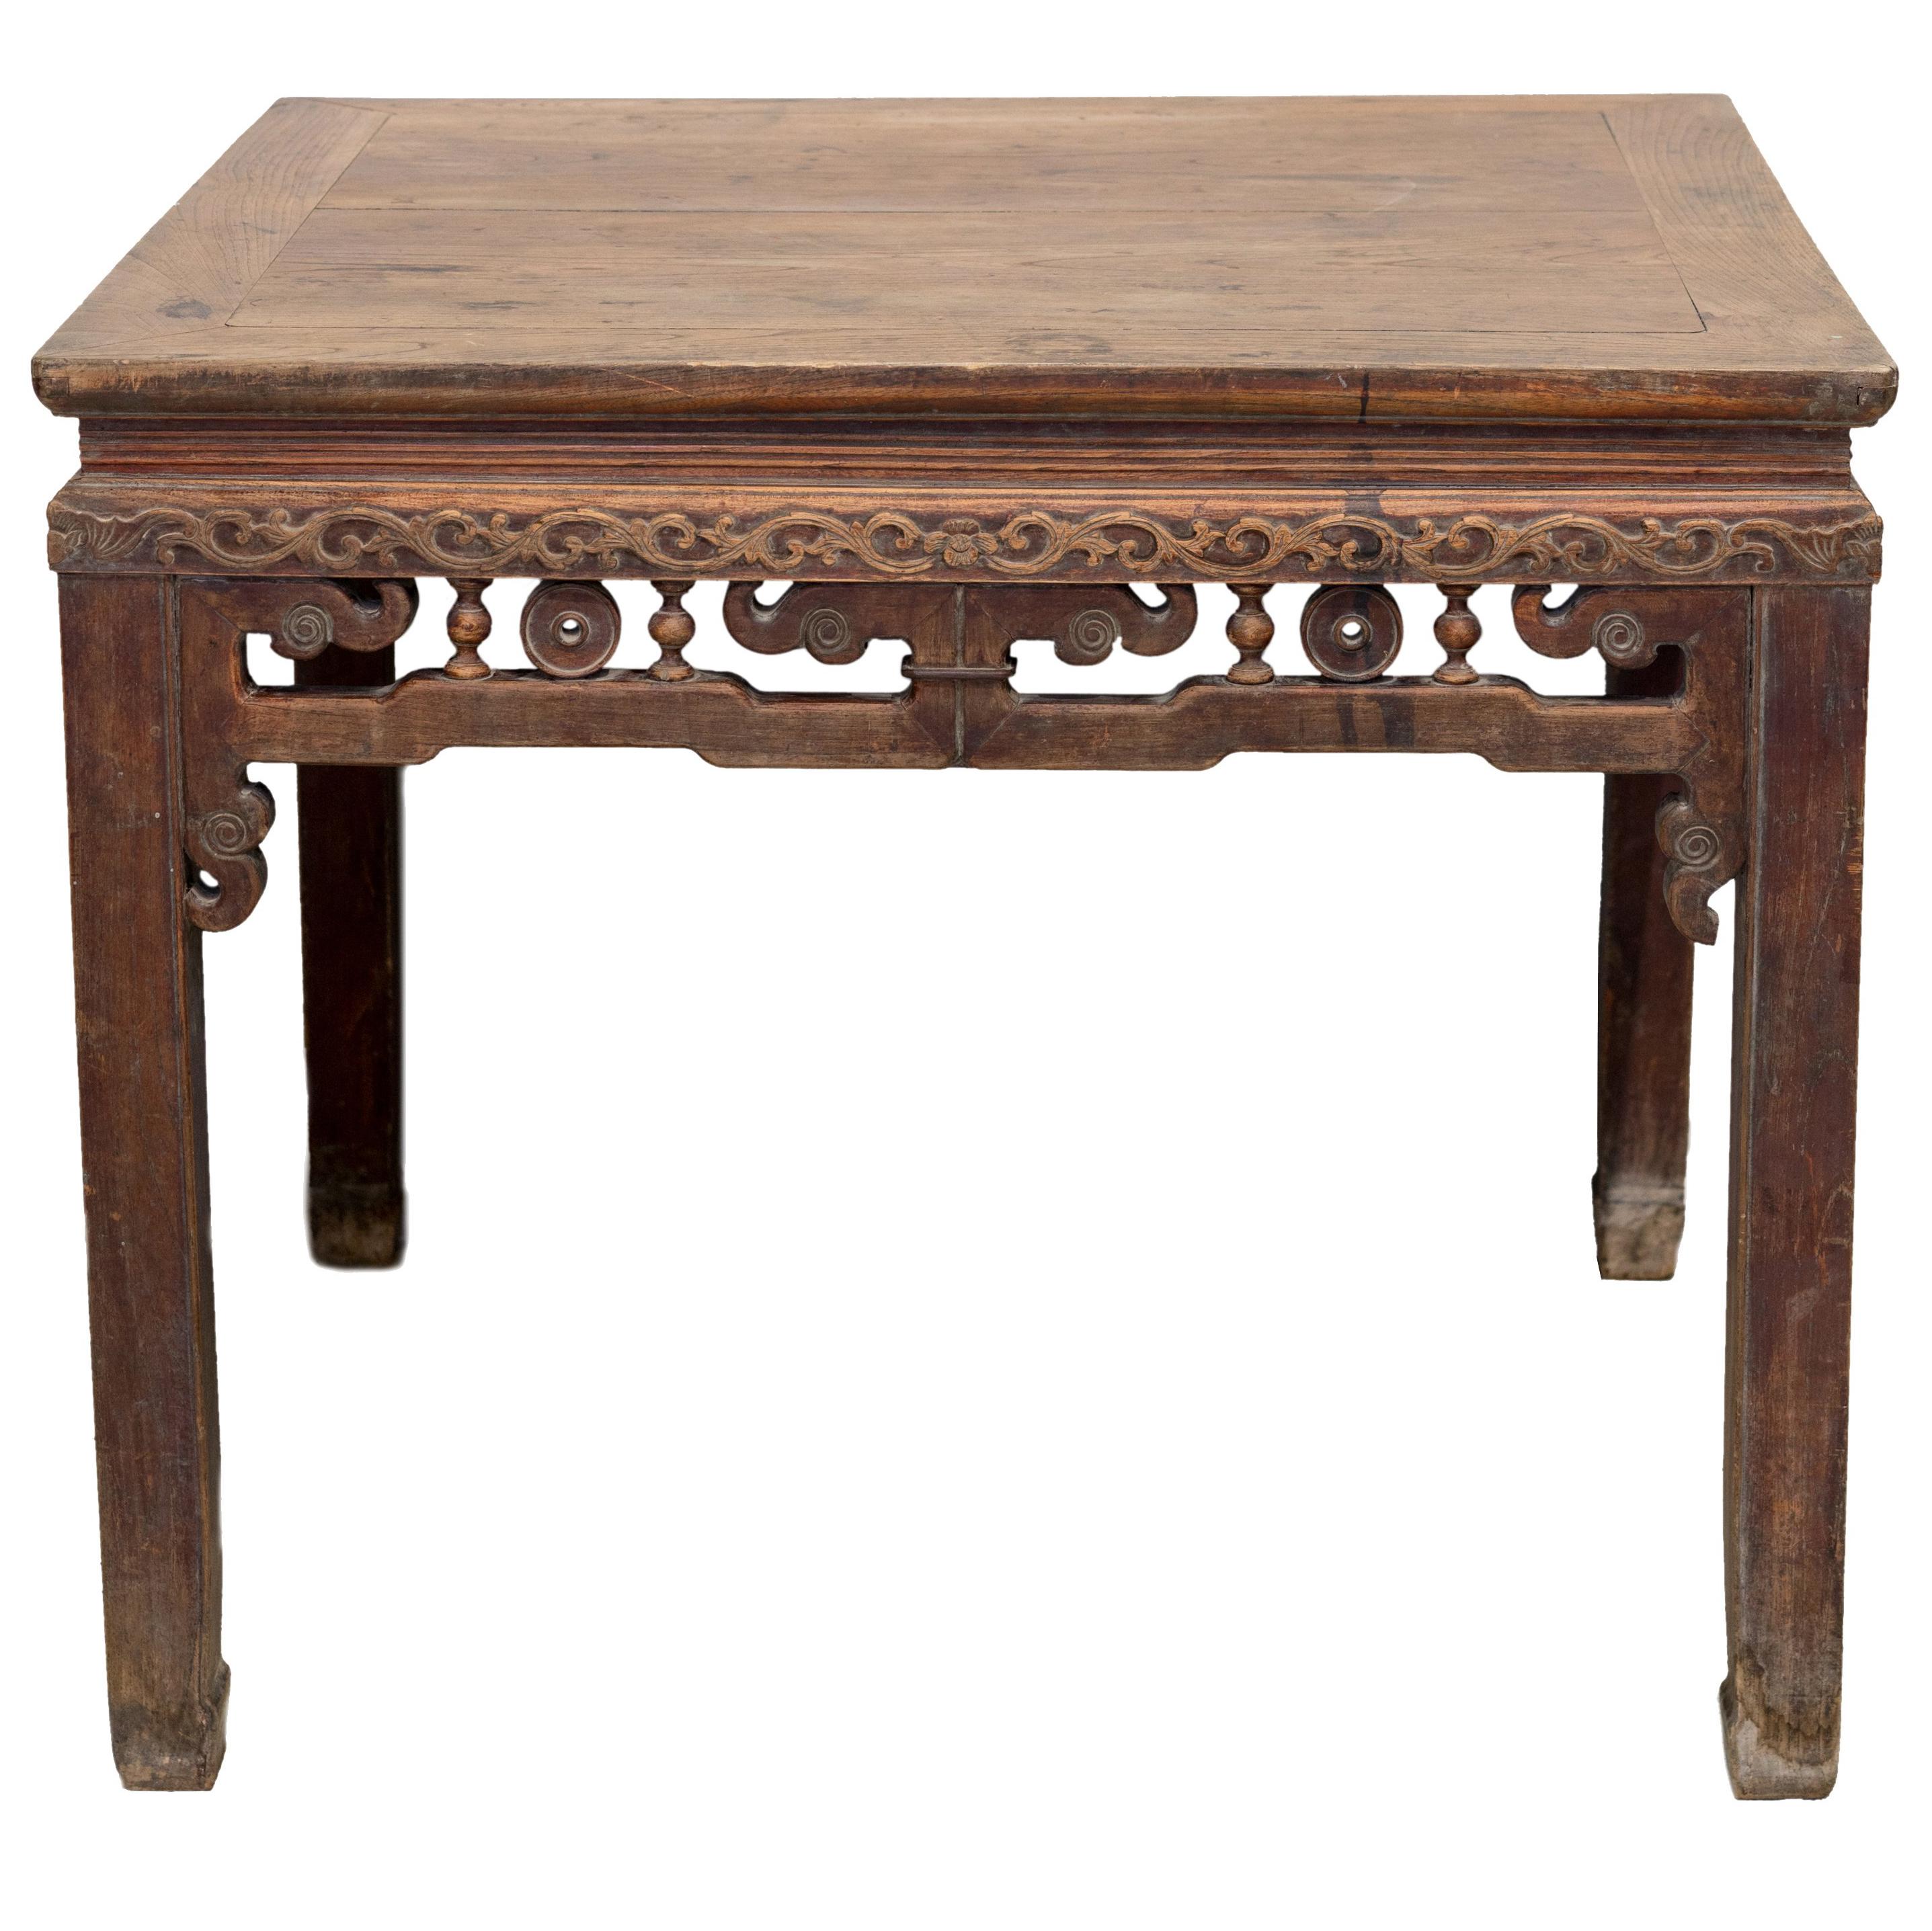 Early 20th Century Square Chinese Table